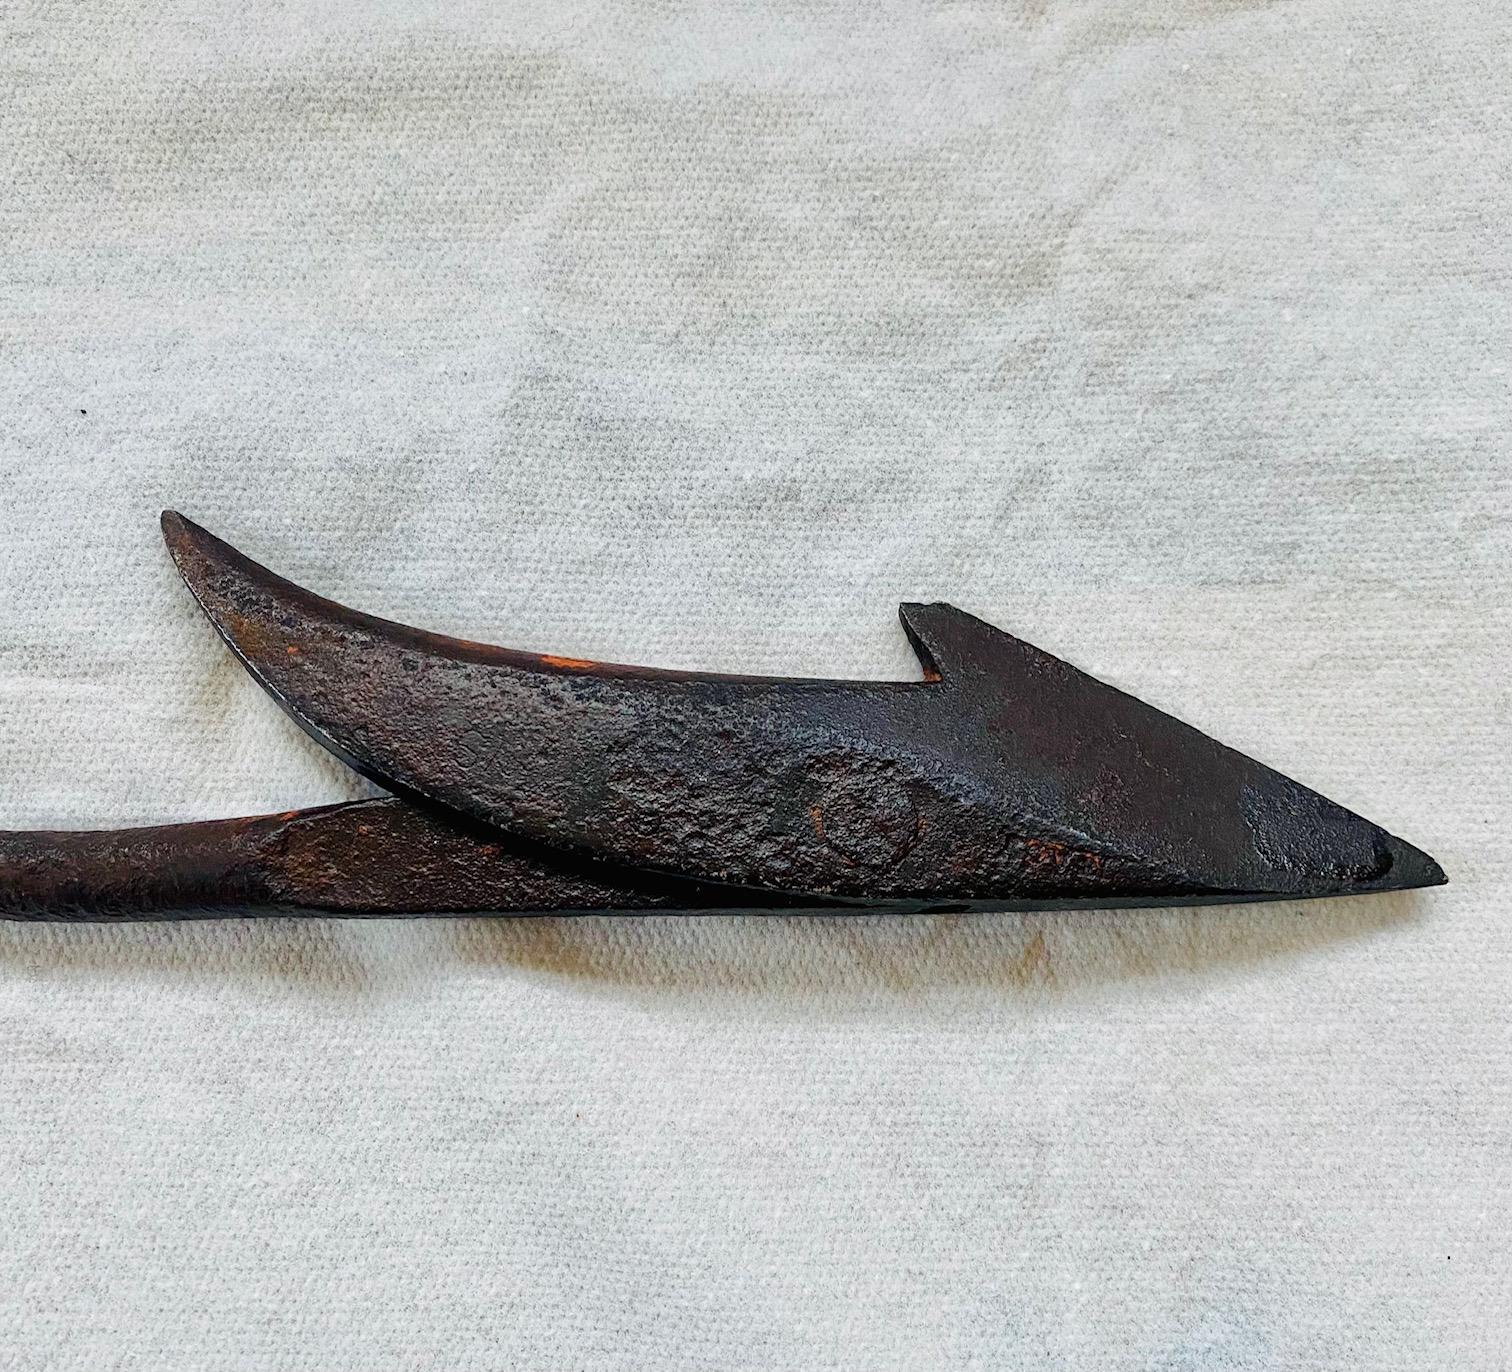 Antique American Darting Gun Toggle Iron Harpoon, made by E.B. and F. Macy, New Bedford, for the Larboard Boat on the Whaling Bark Sunbeam (1856 - 1908), having an improved toggle head with acute barb (standing nearly at a right angle), and an